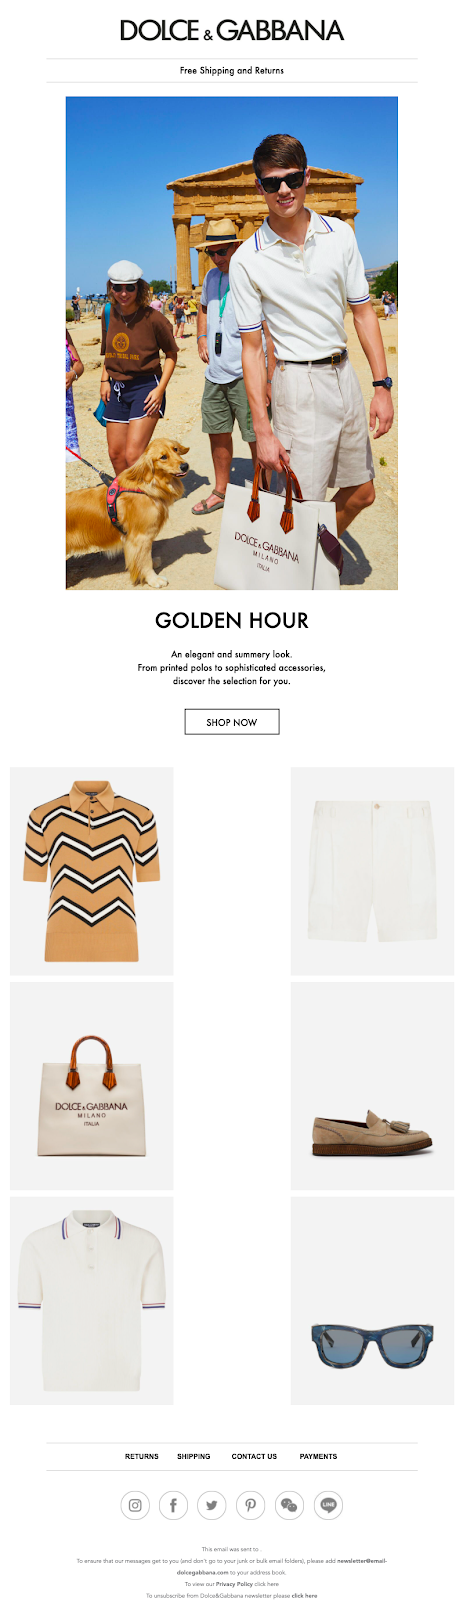 Fashion email marketing best practice: use charming visuals